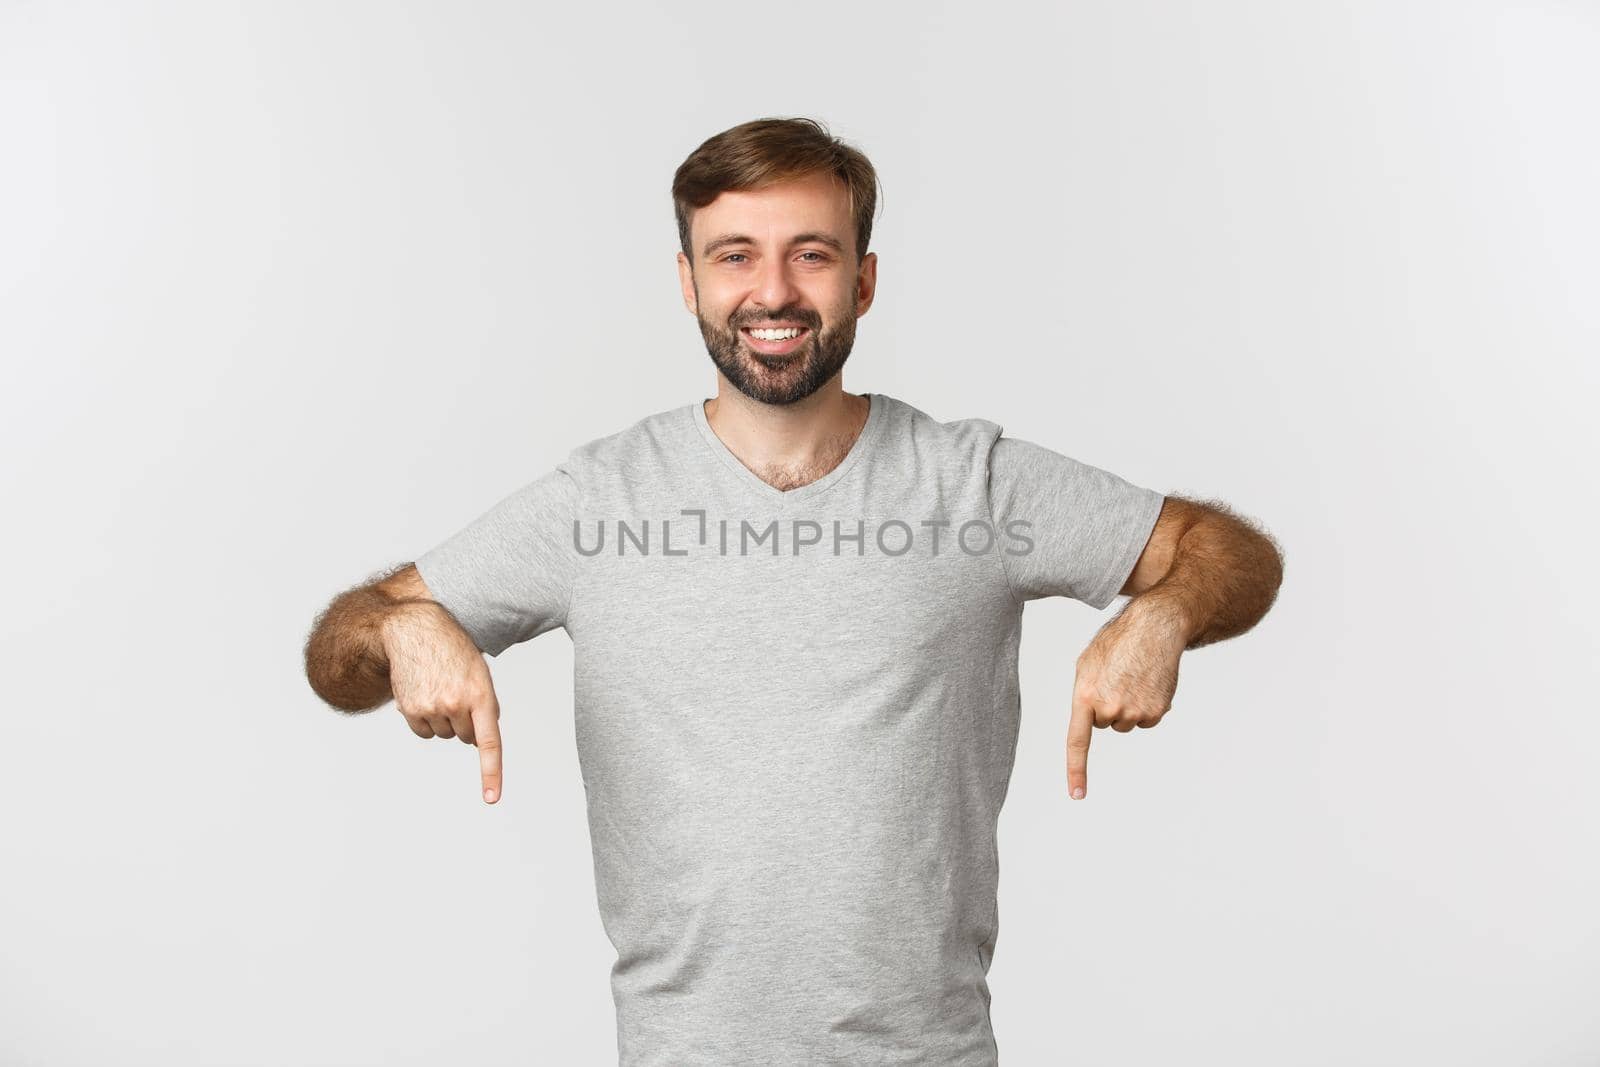 Portrait of attractive bearded man in gray t-shirt, showing logo, pointing fingers down, standing over white background.